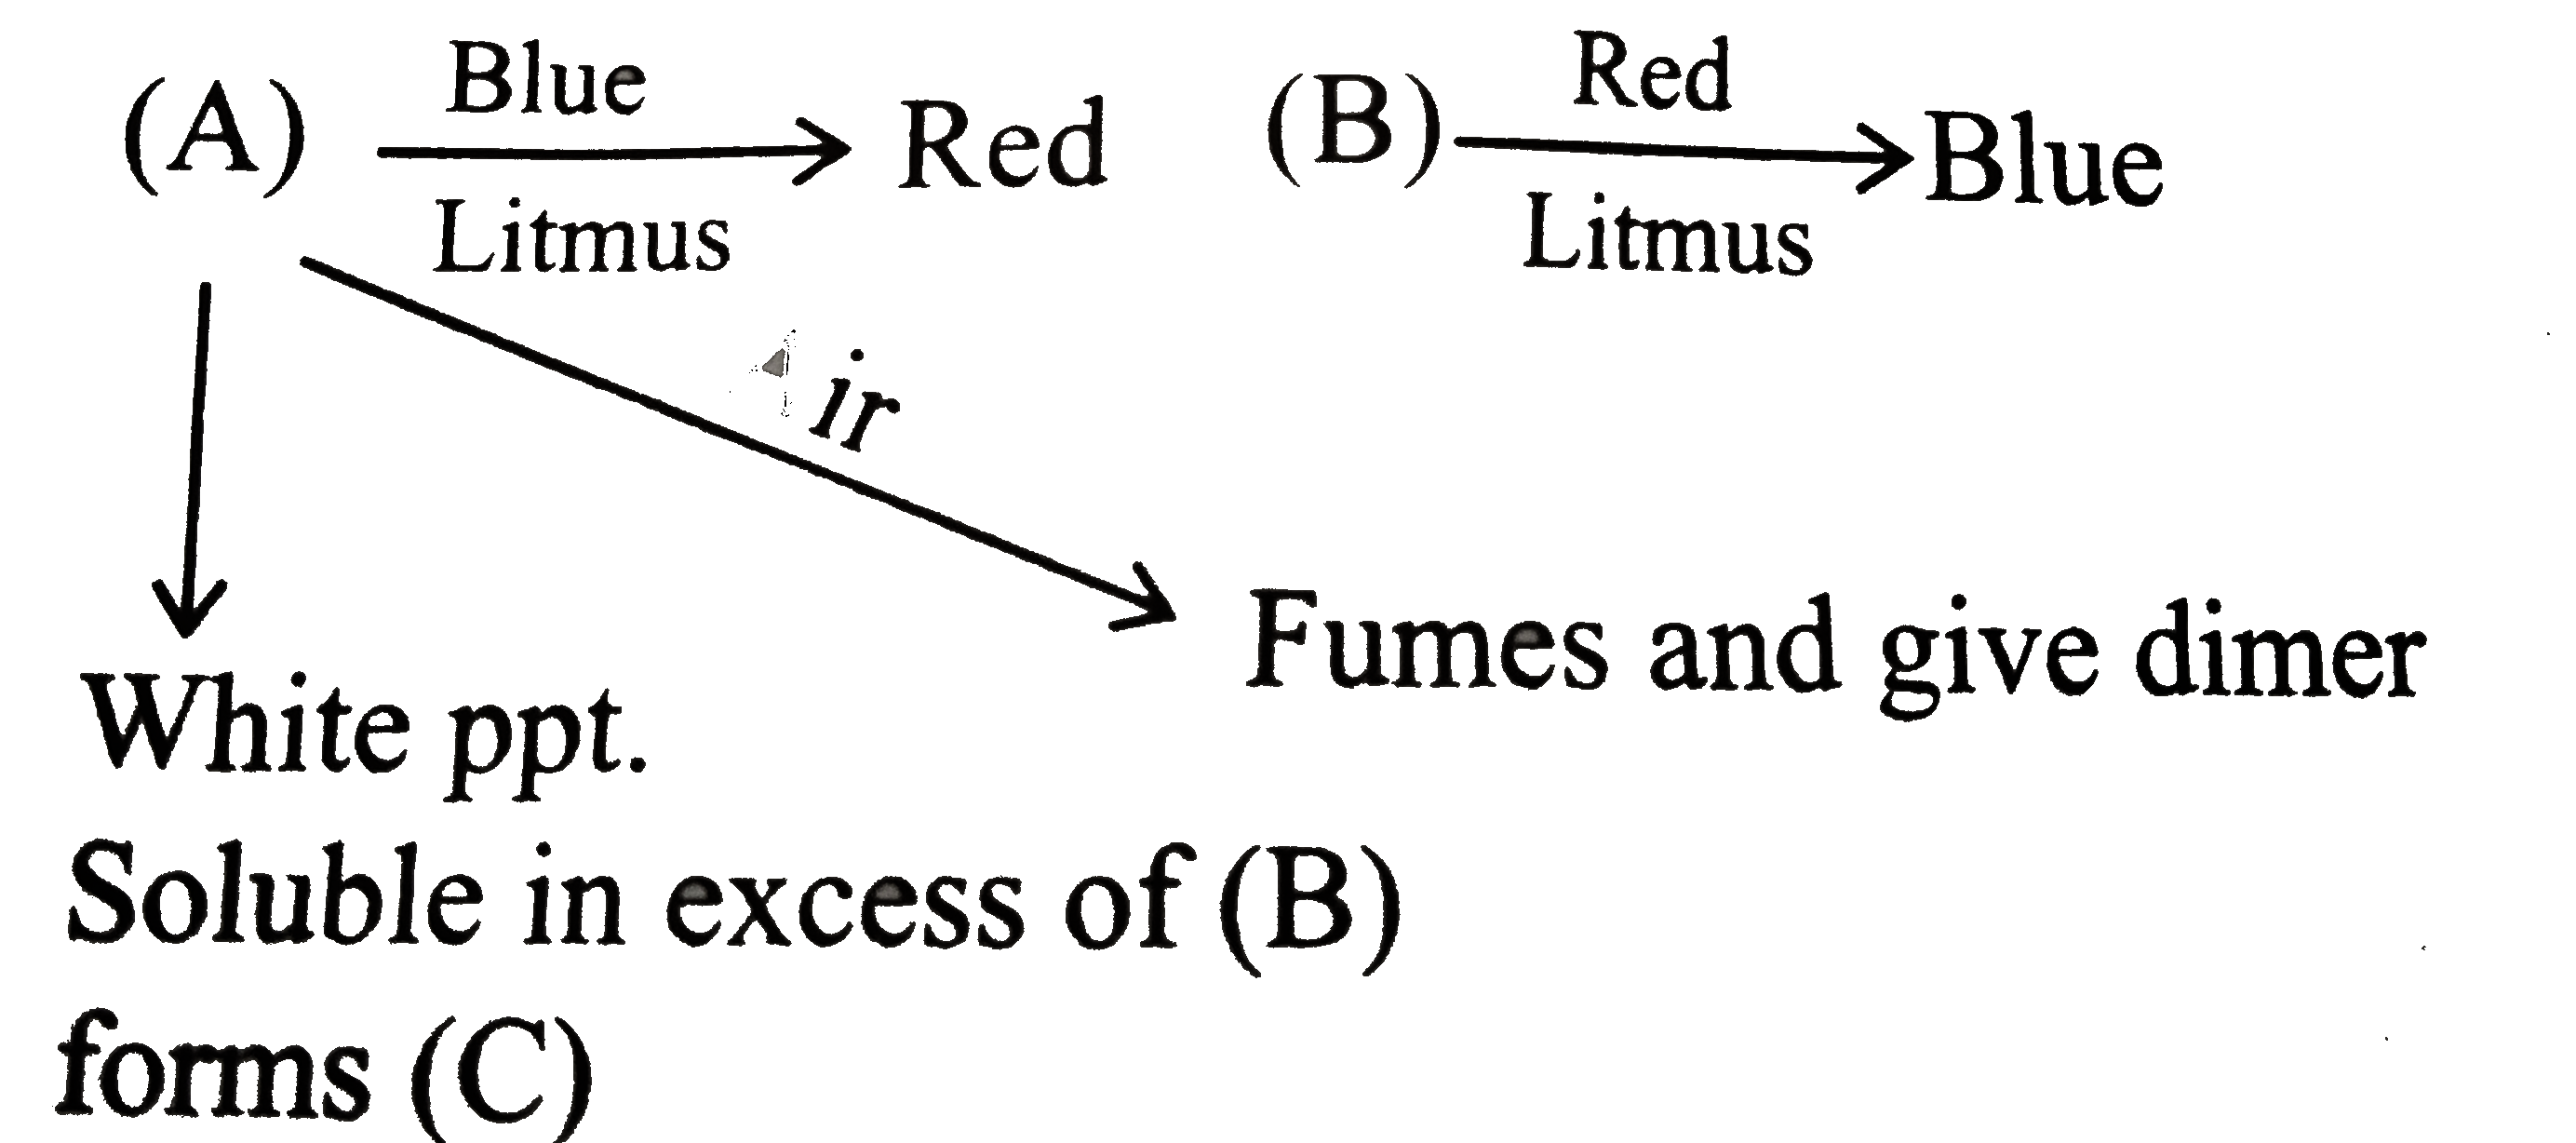 A colourless mixture of two salts (A) and (B) [excess] is soluble in H(2)O.  Identify B